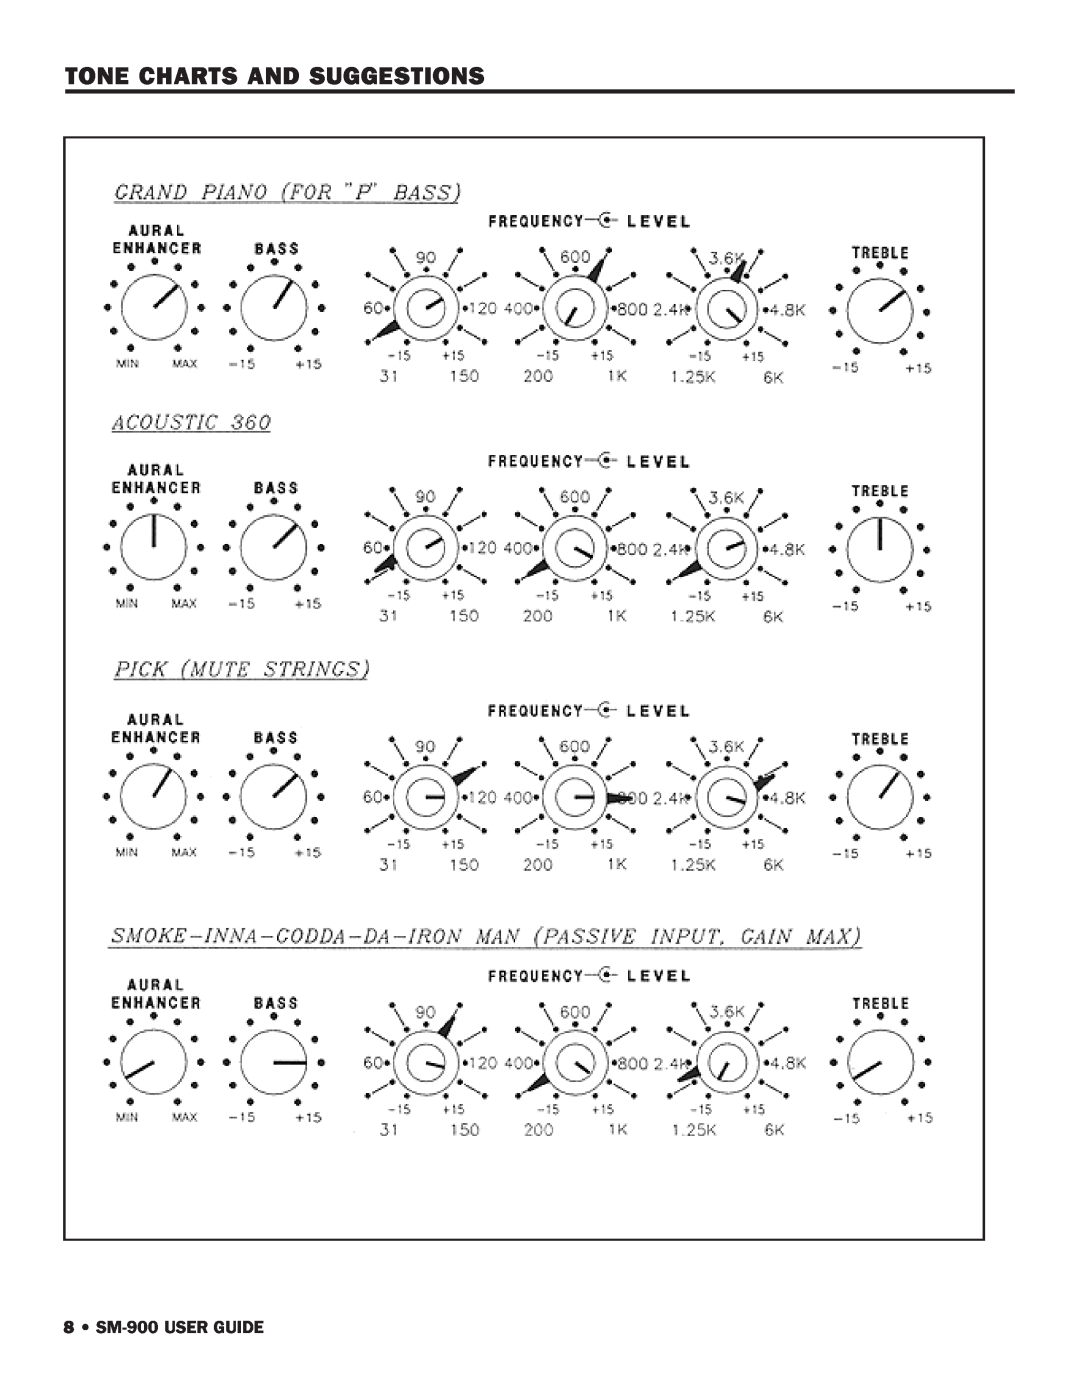 SWR Sound manual Tone Charts And Suggestions, 8 SM-900USER GUIDE 